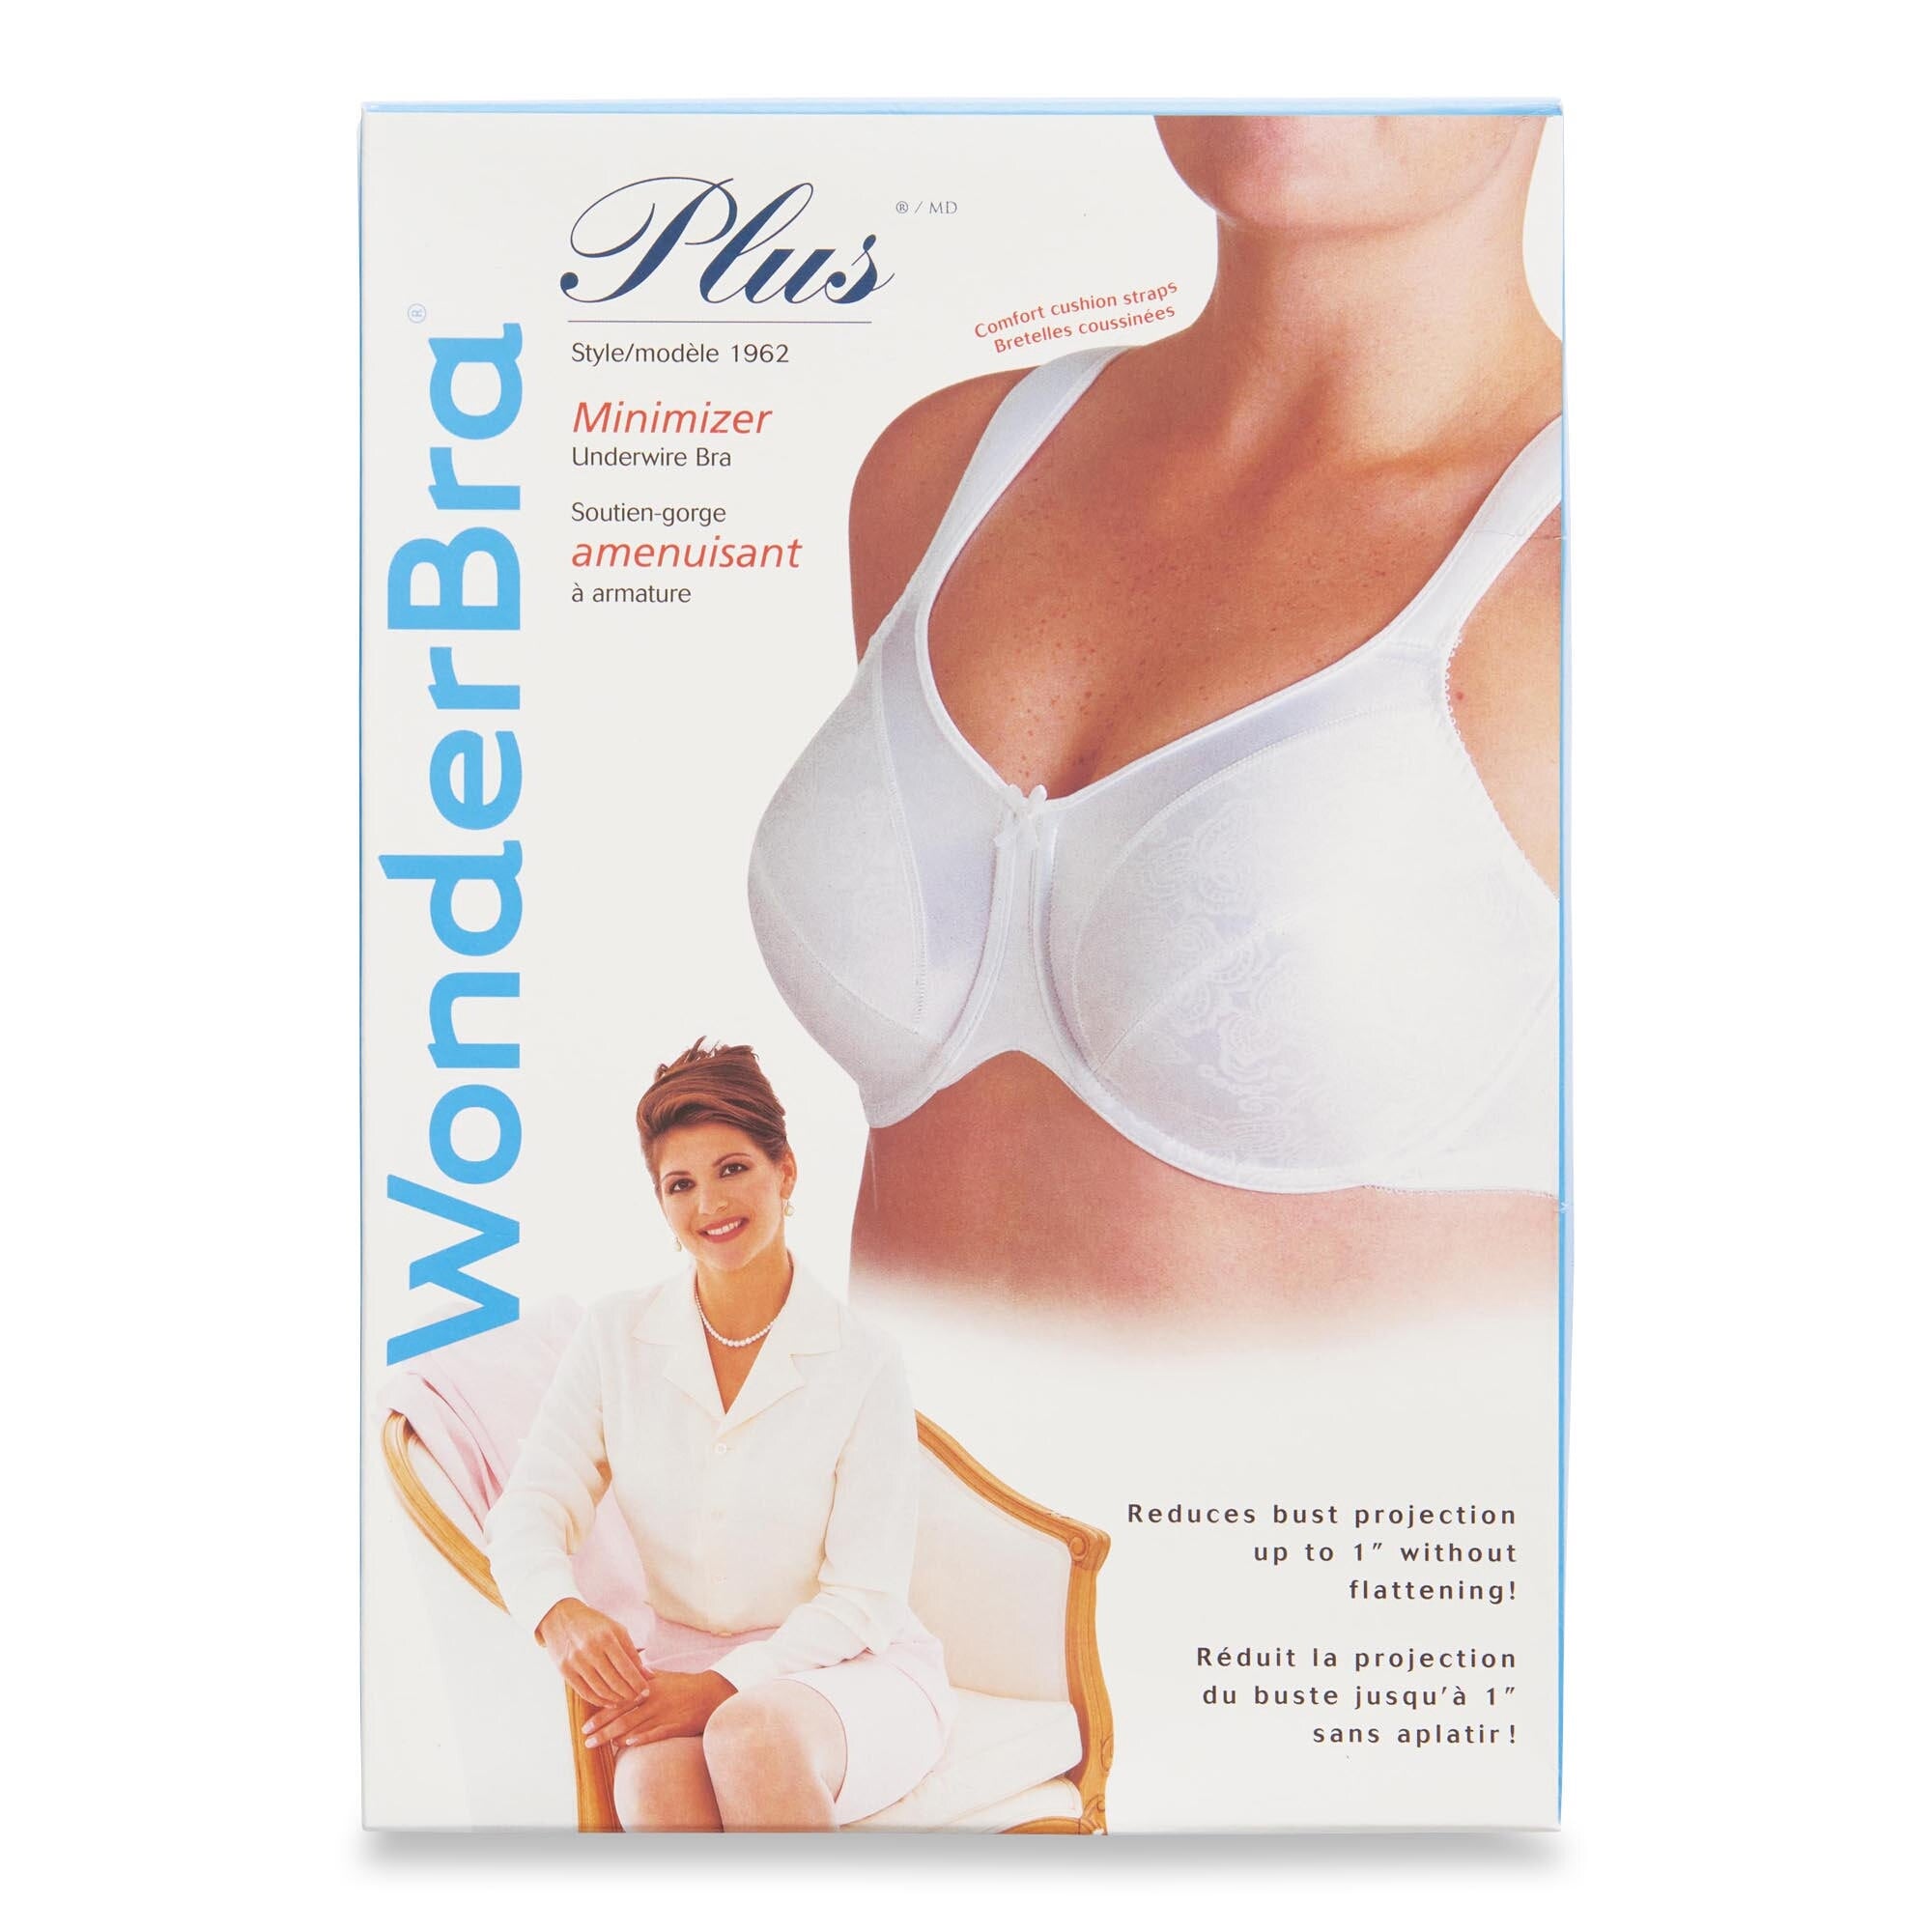 WonderBra Canada - Our Plus size style 1934 offers it all